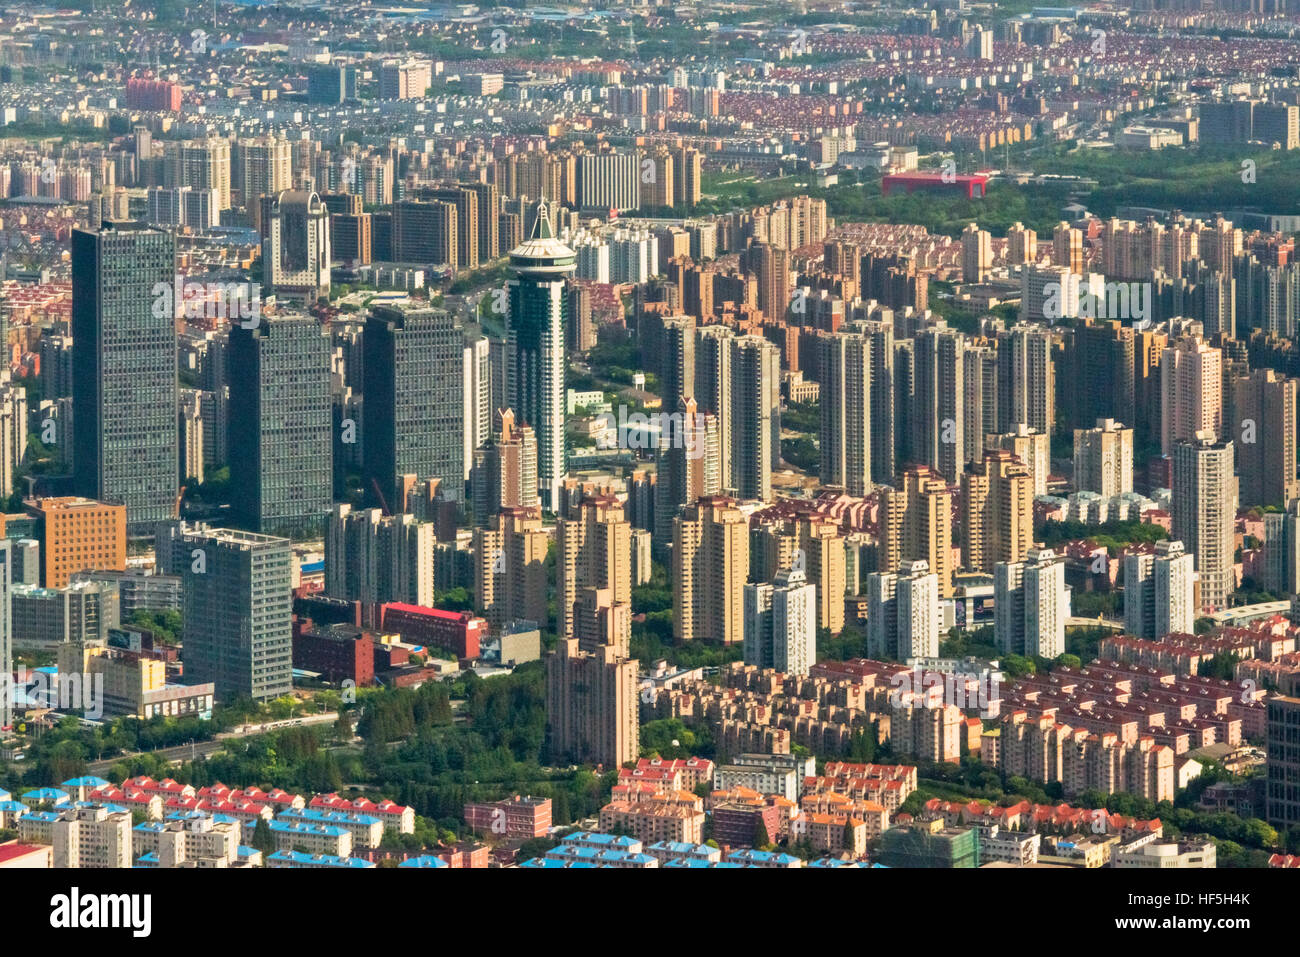 High rises in Pudong, Shanghai, China Stock Photo